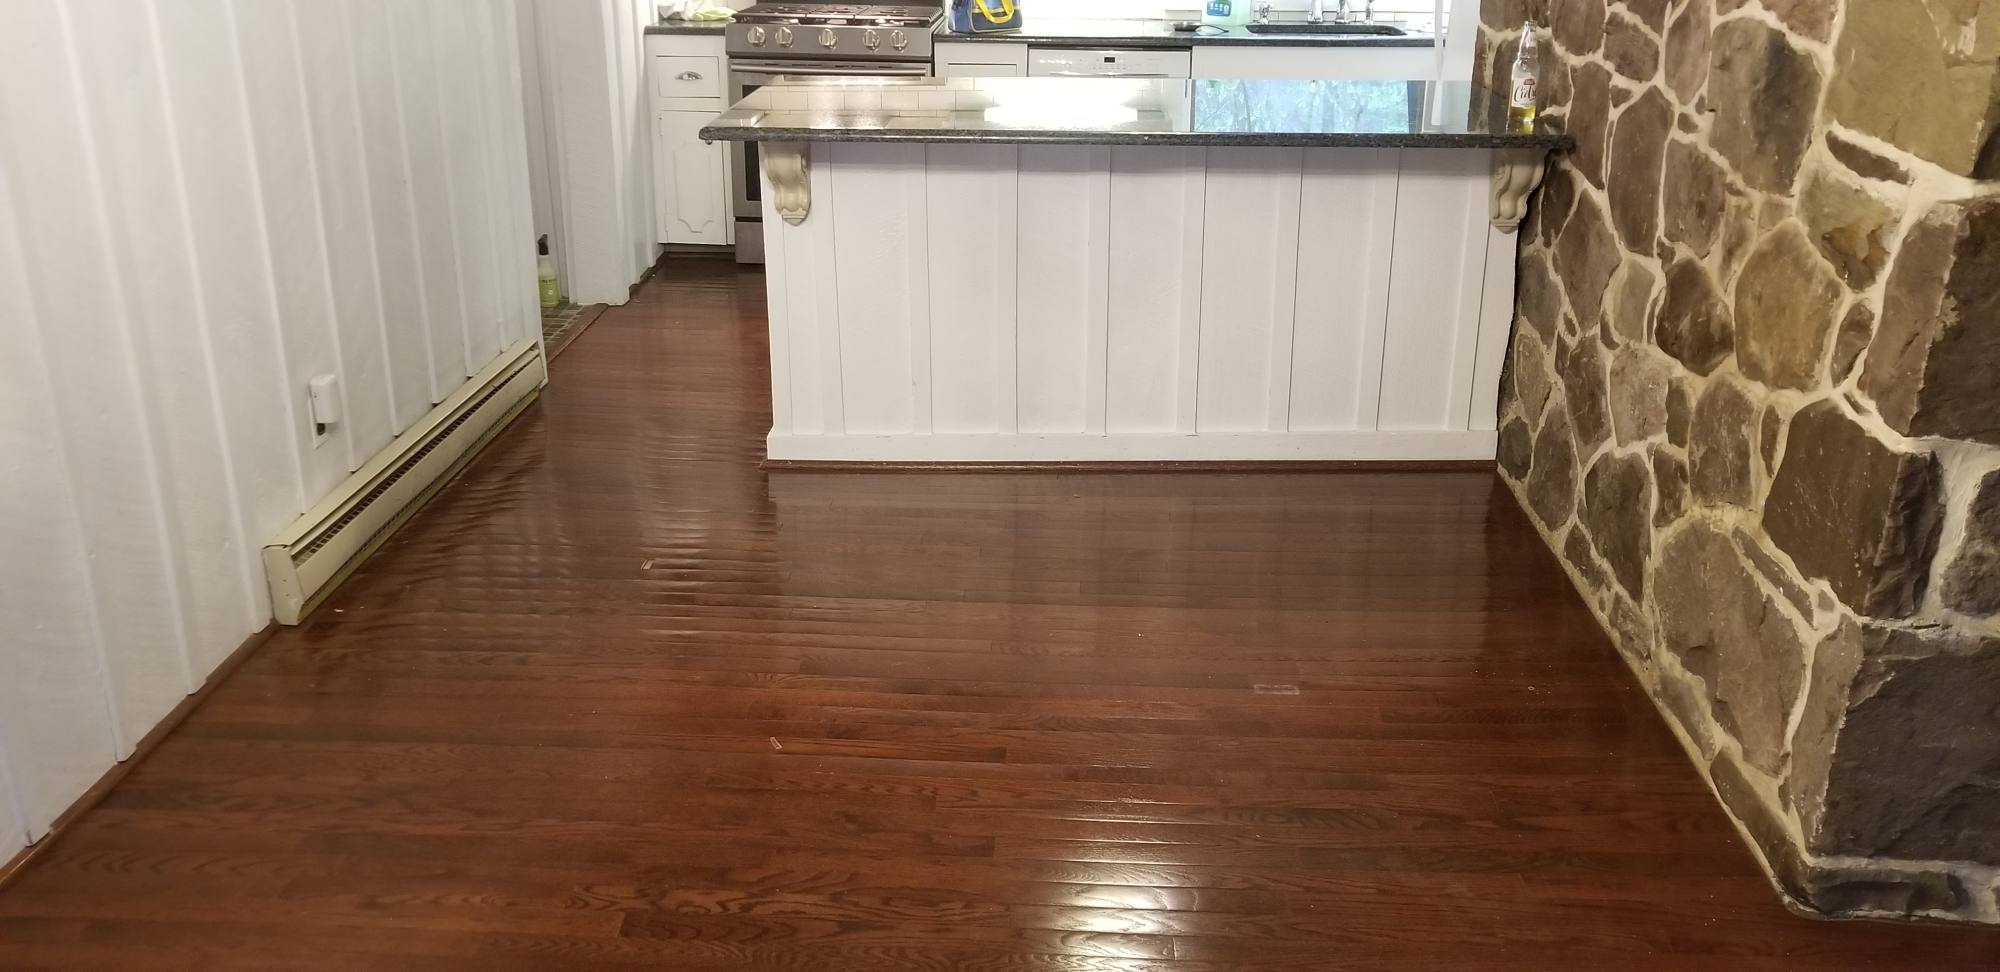 DIY Farmhouse Wide Plank Floor Made From Plywood - The Dining Room Subfloor With Staples Removed